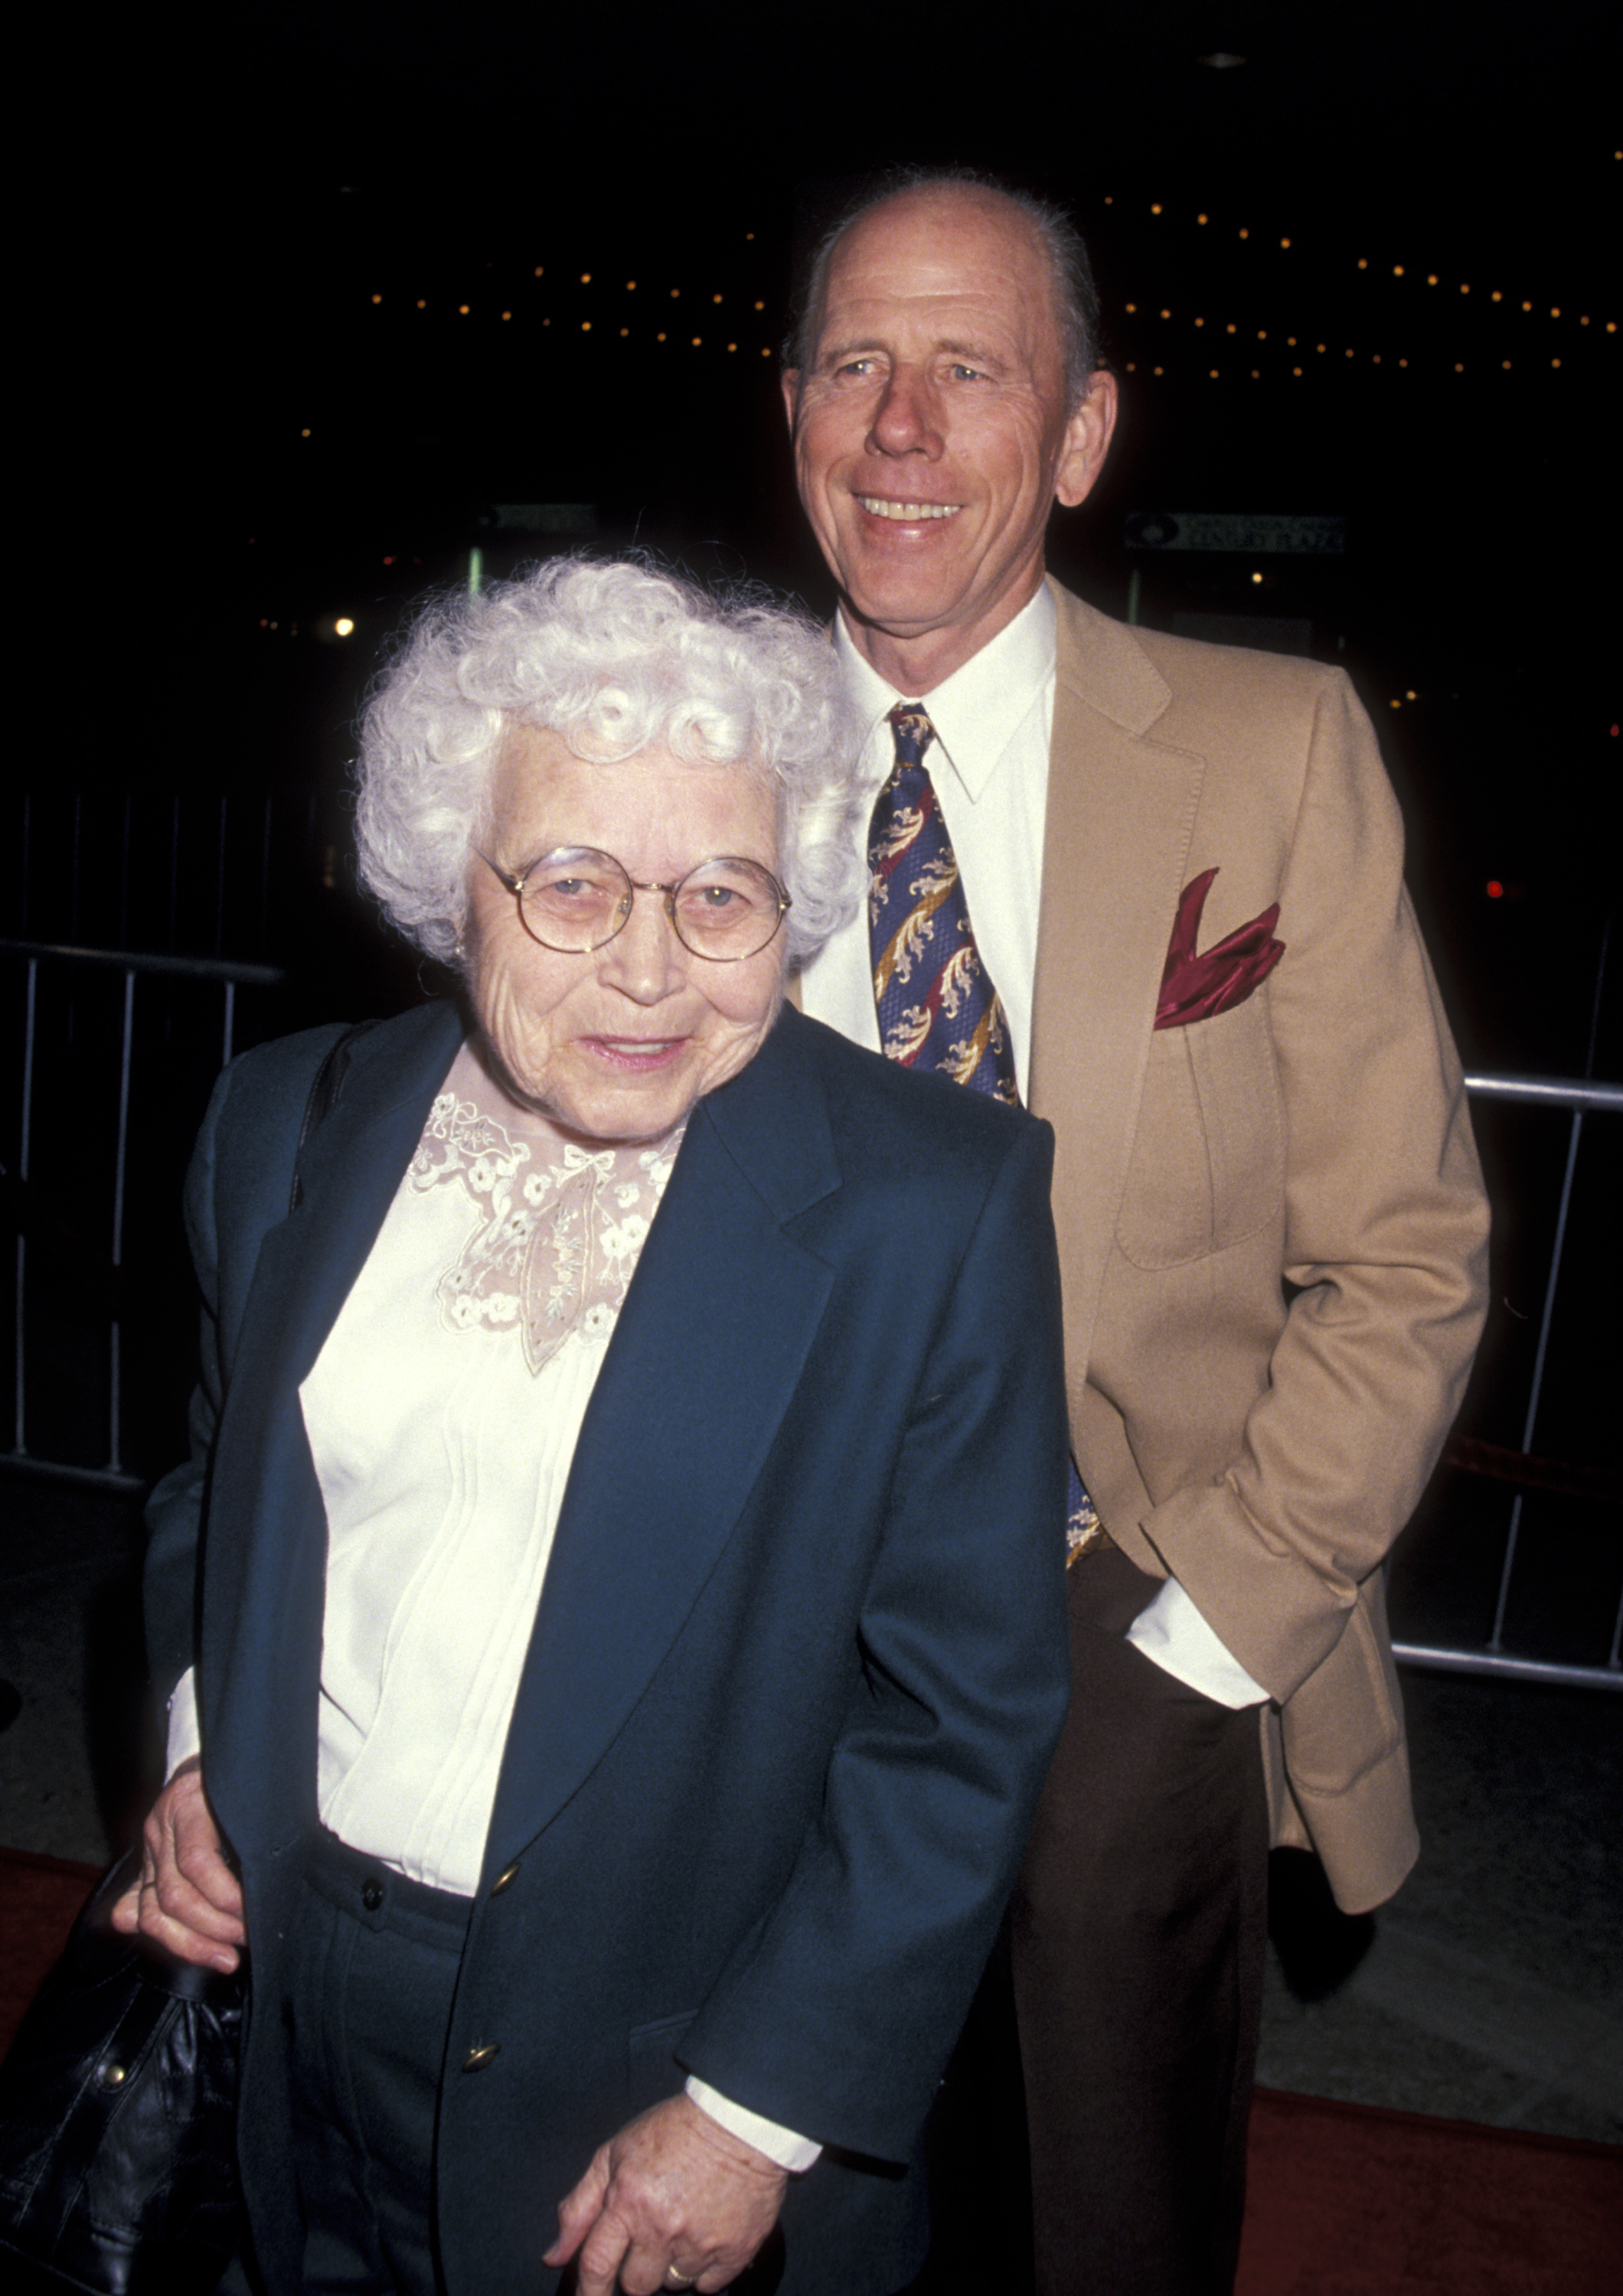 Ron Howard's parents, Jean Speegle Howard and Rance Howard, at the screening of "The Paper" in Century City, California on March 16, 1994 | Source: Getty Images